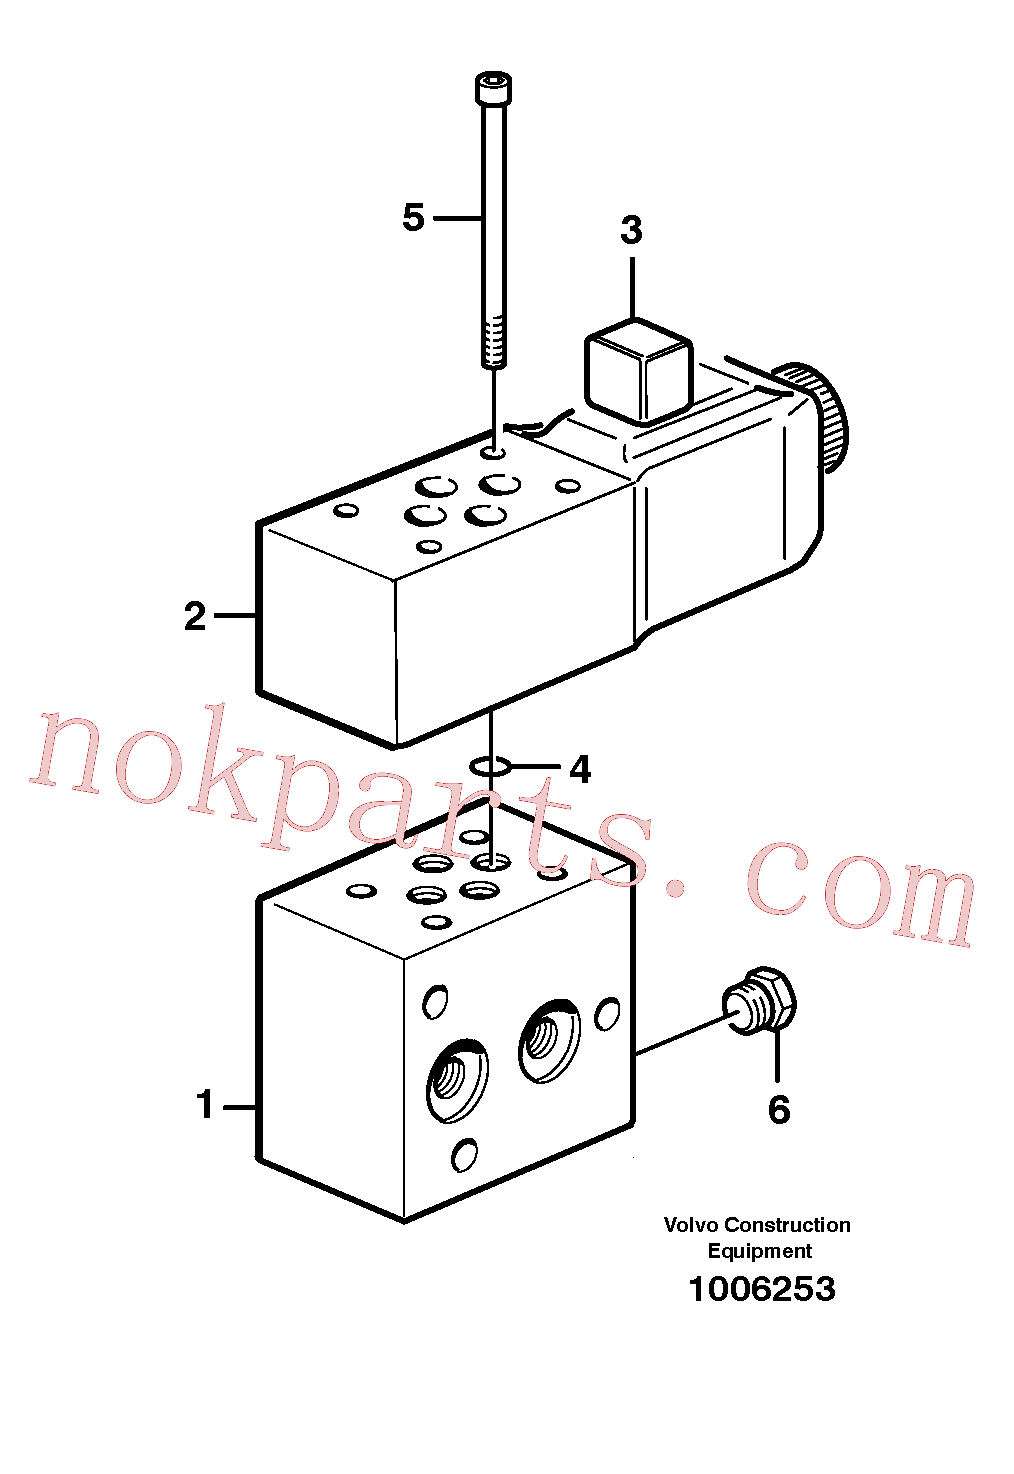 VOE914390 for Volvo Connecting block(1006253 assembly)